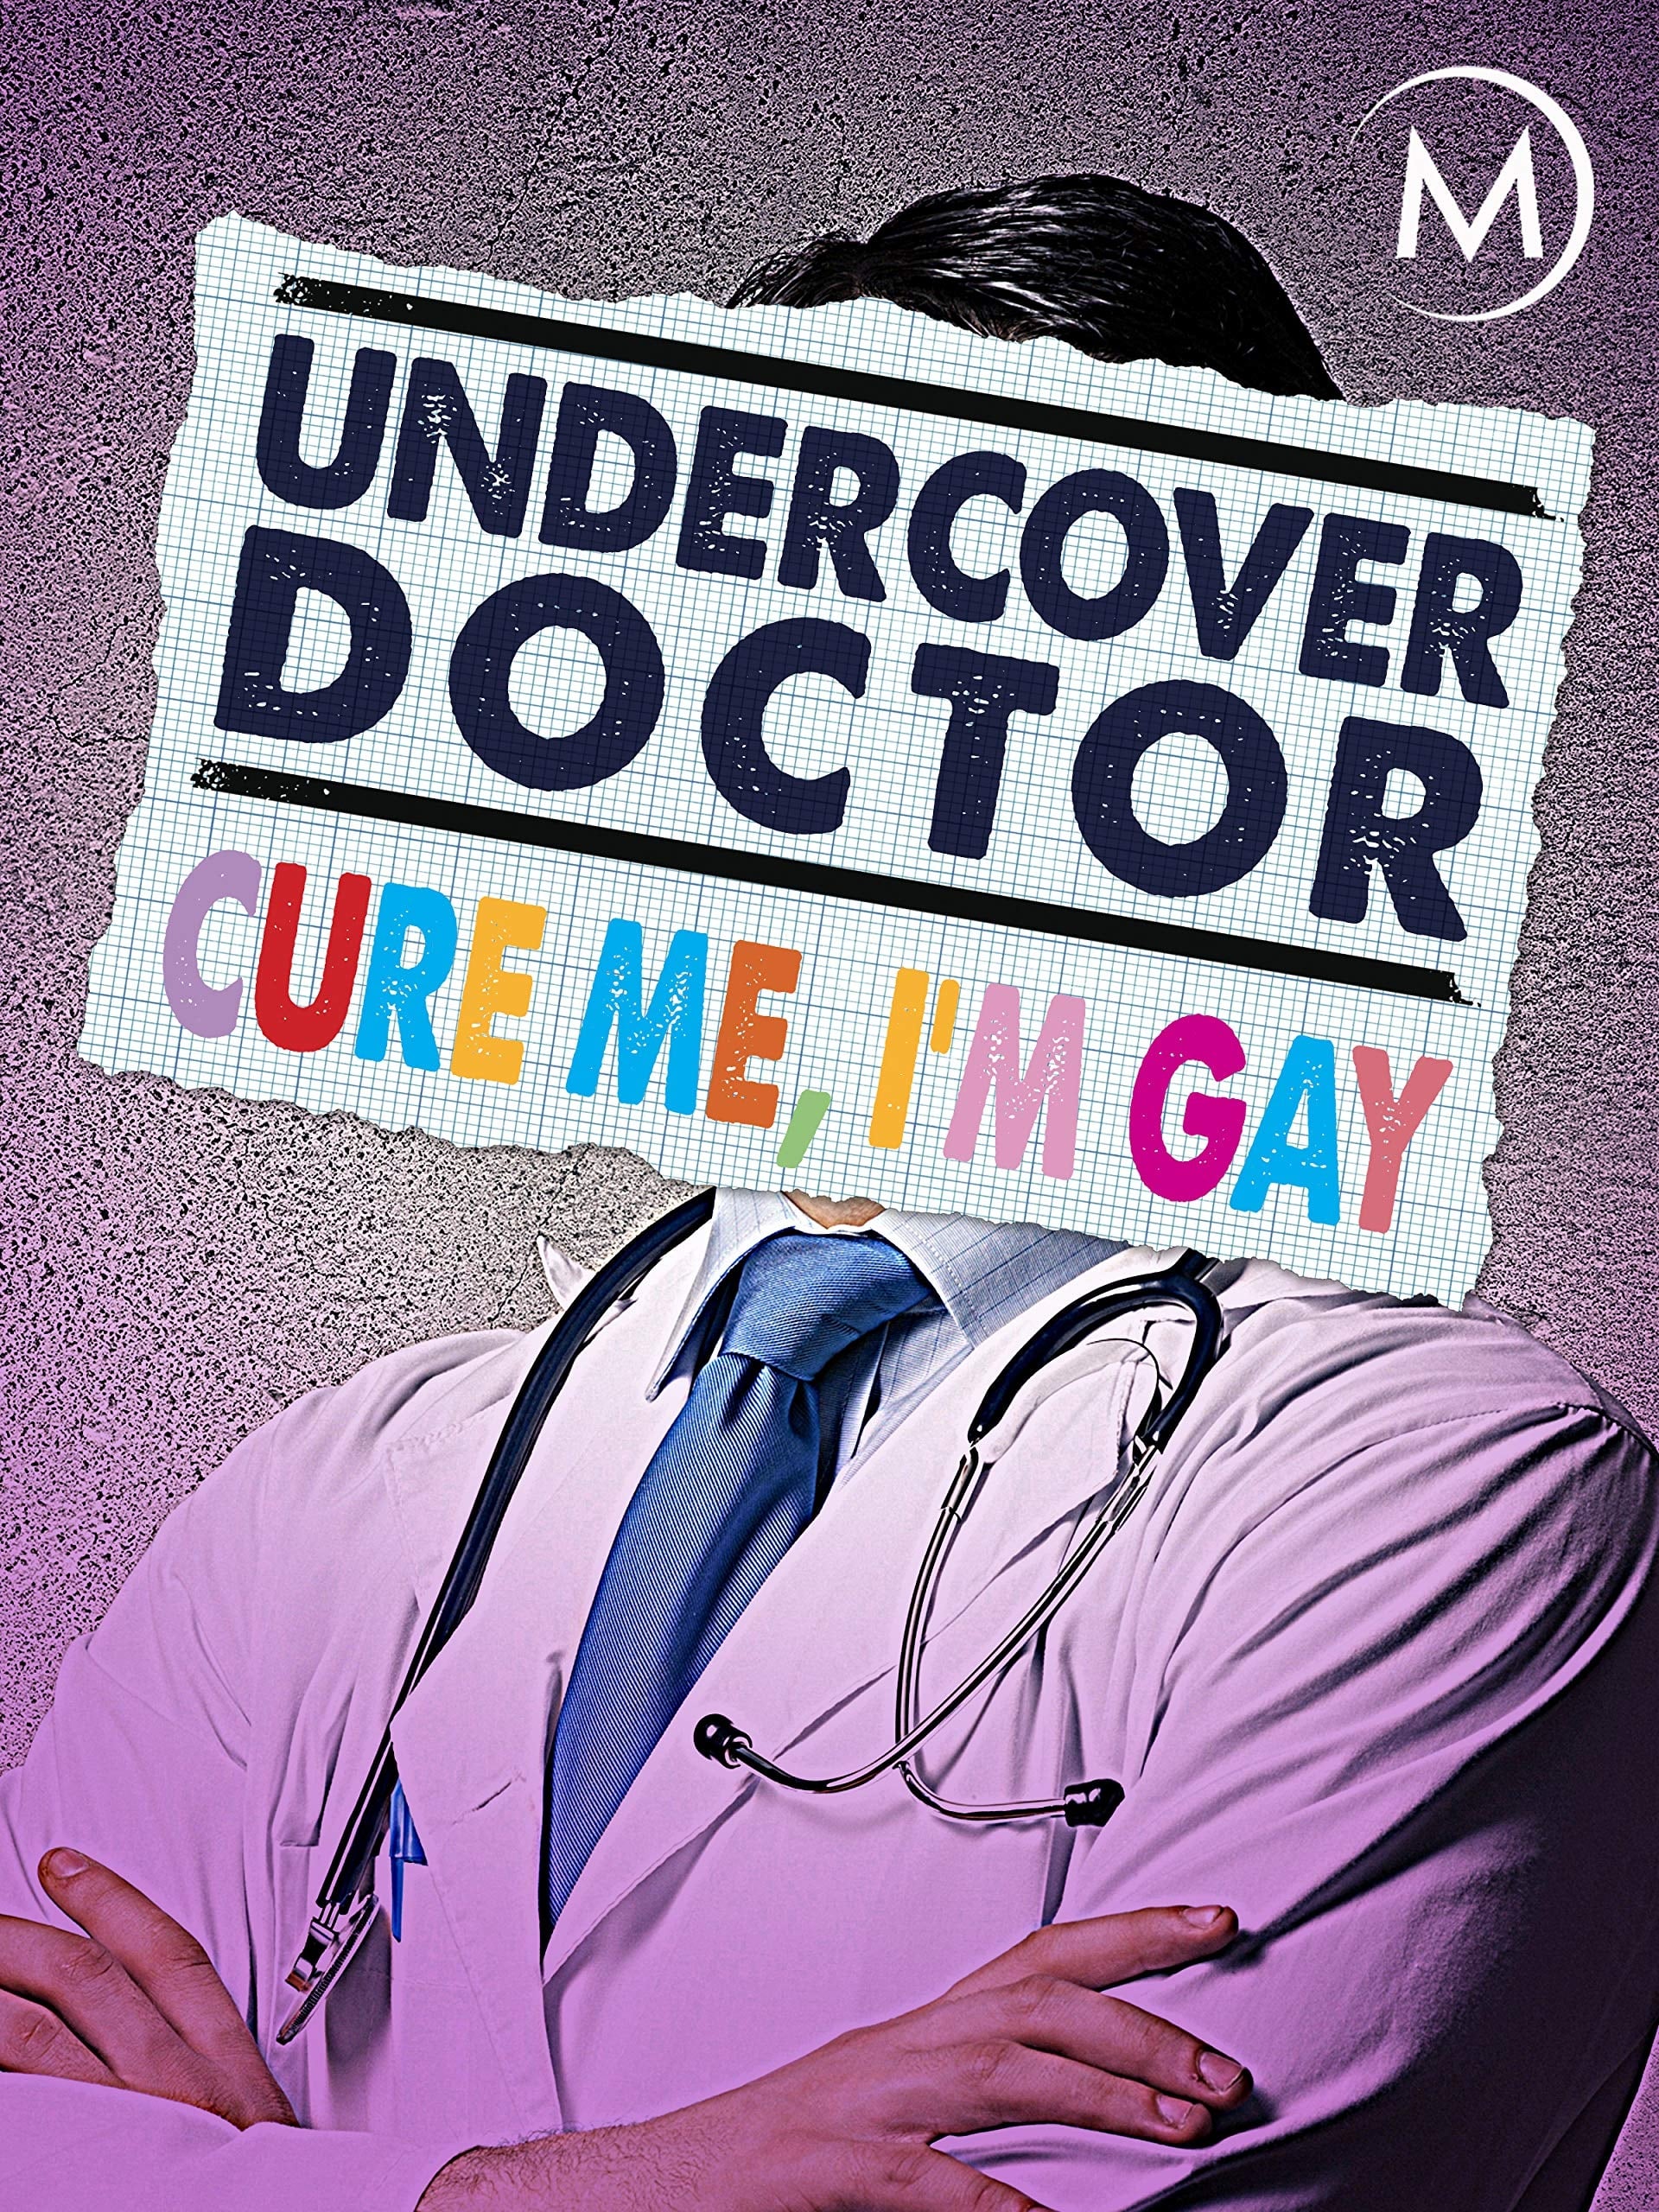 Undercover Doctor: Cure Me, I'm Gay